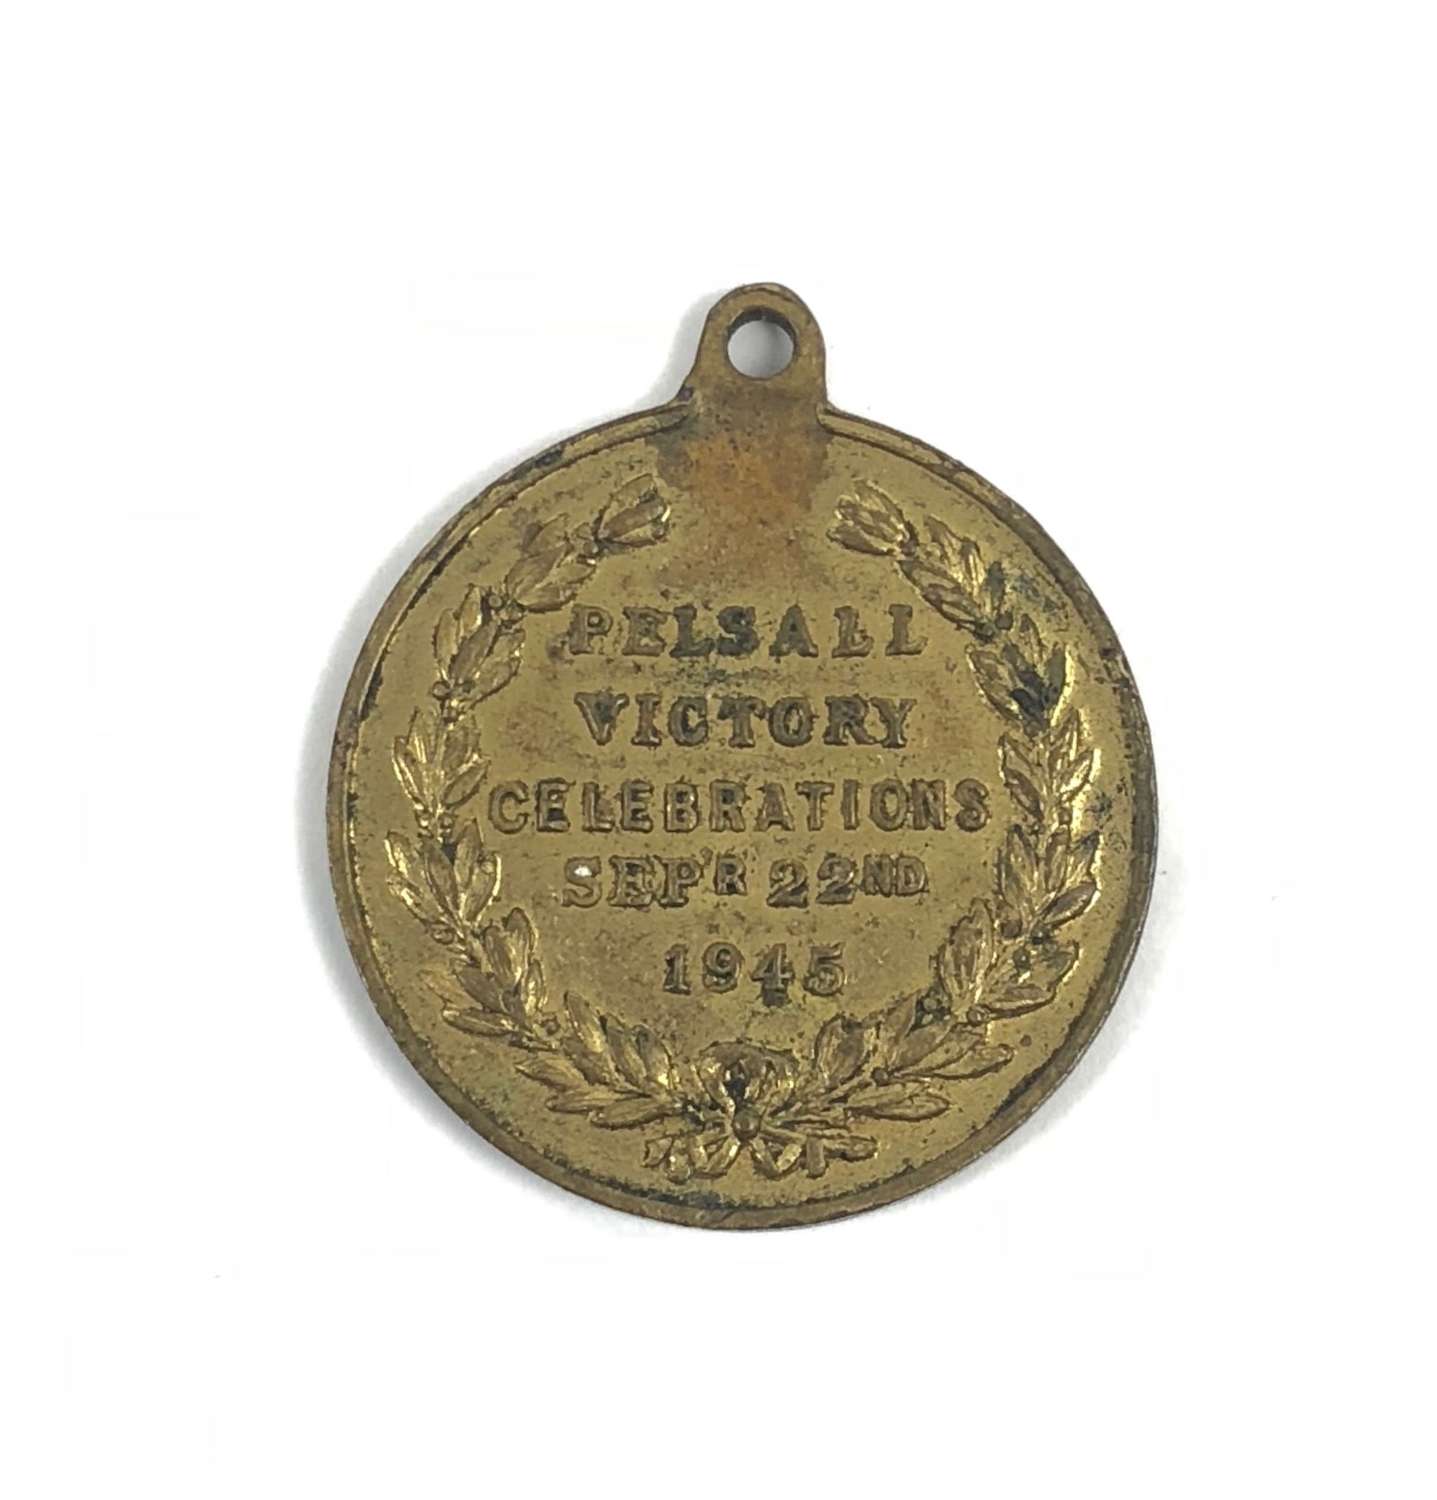 Pelsall Walsall West Midlands WW2 1945 Victory Medal.